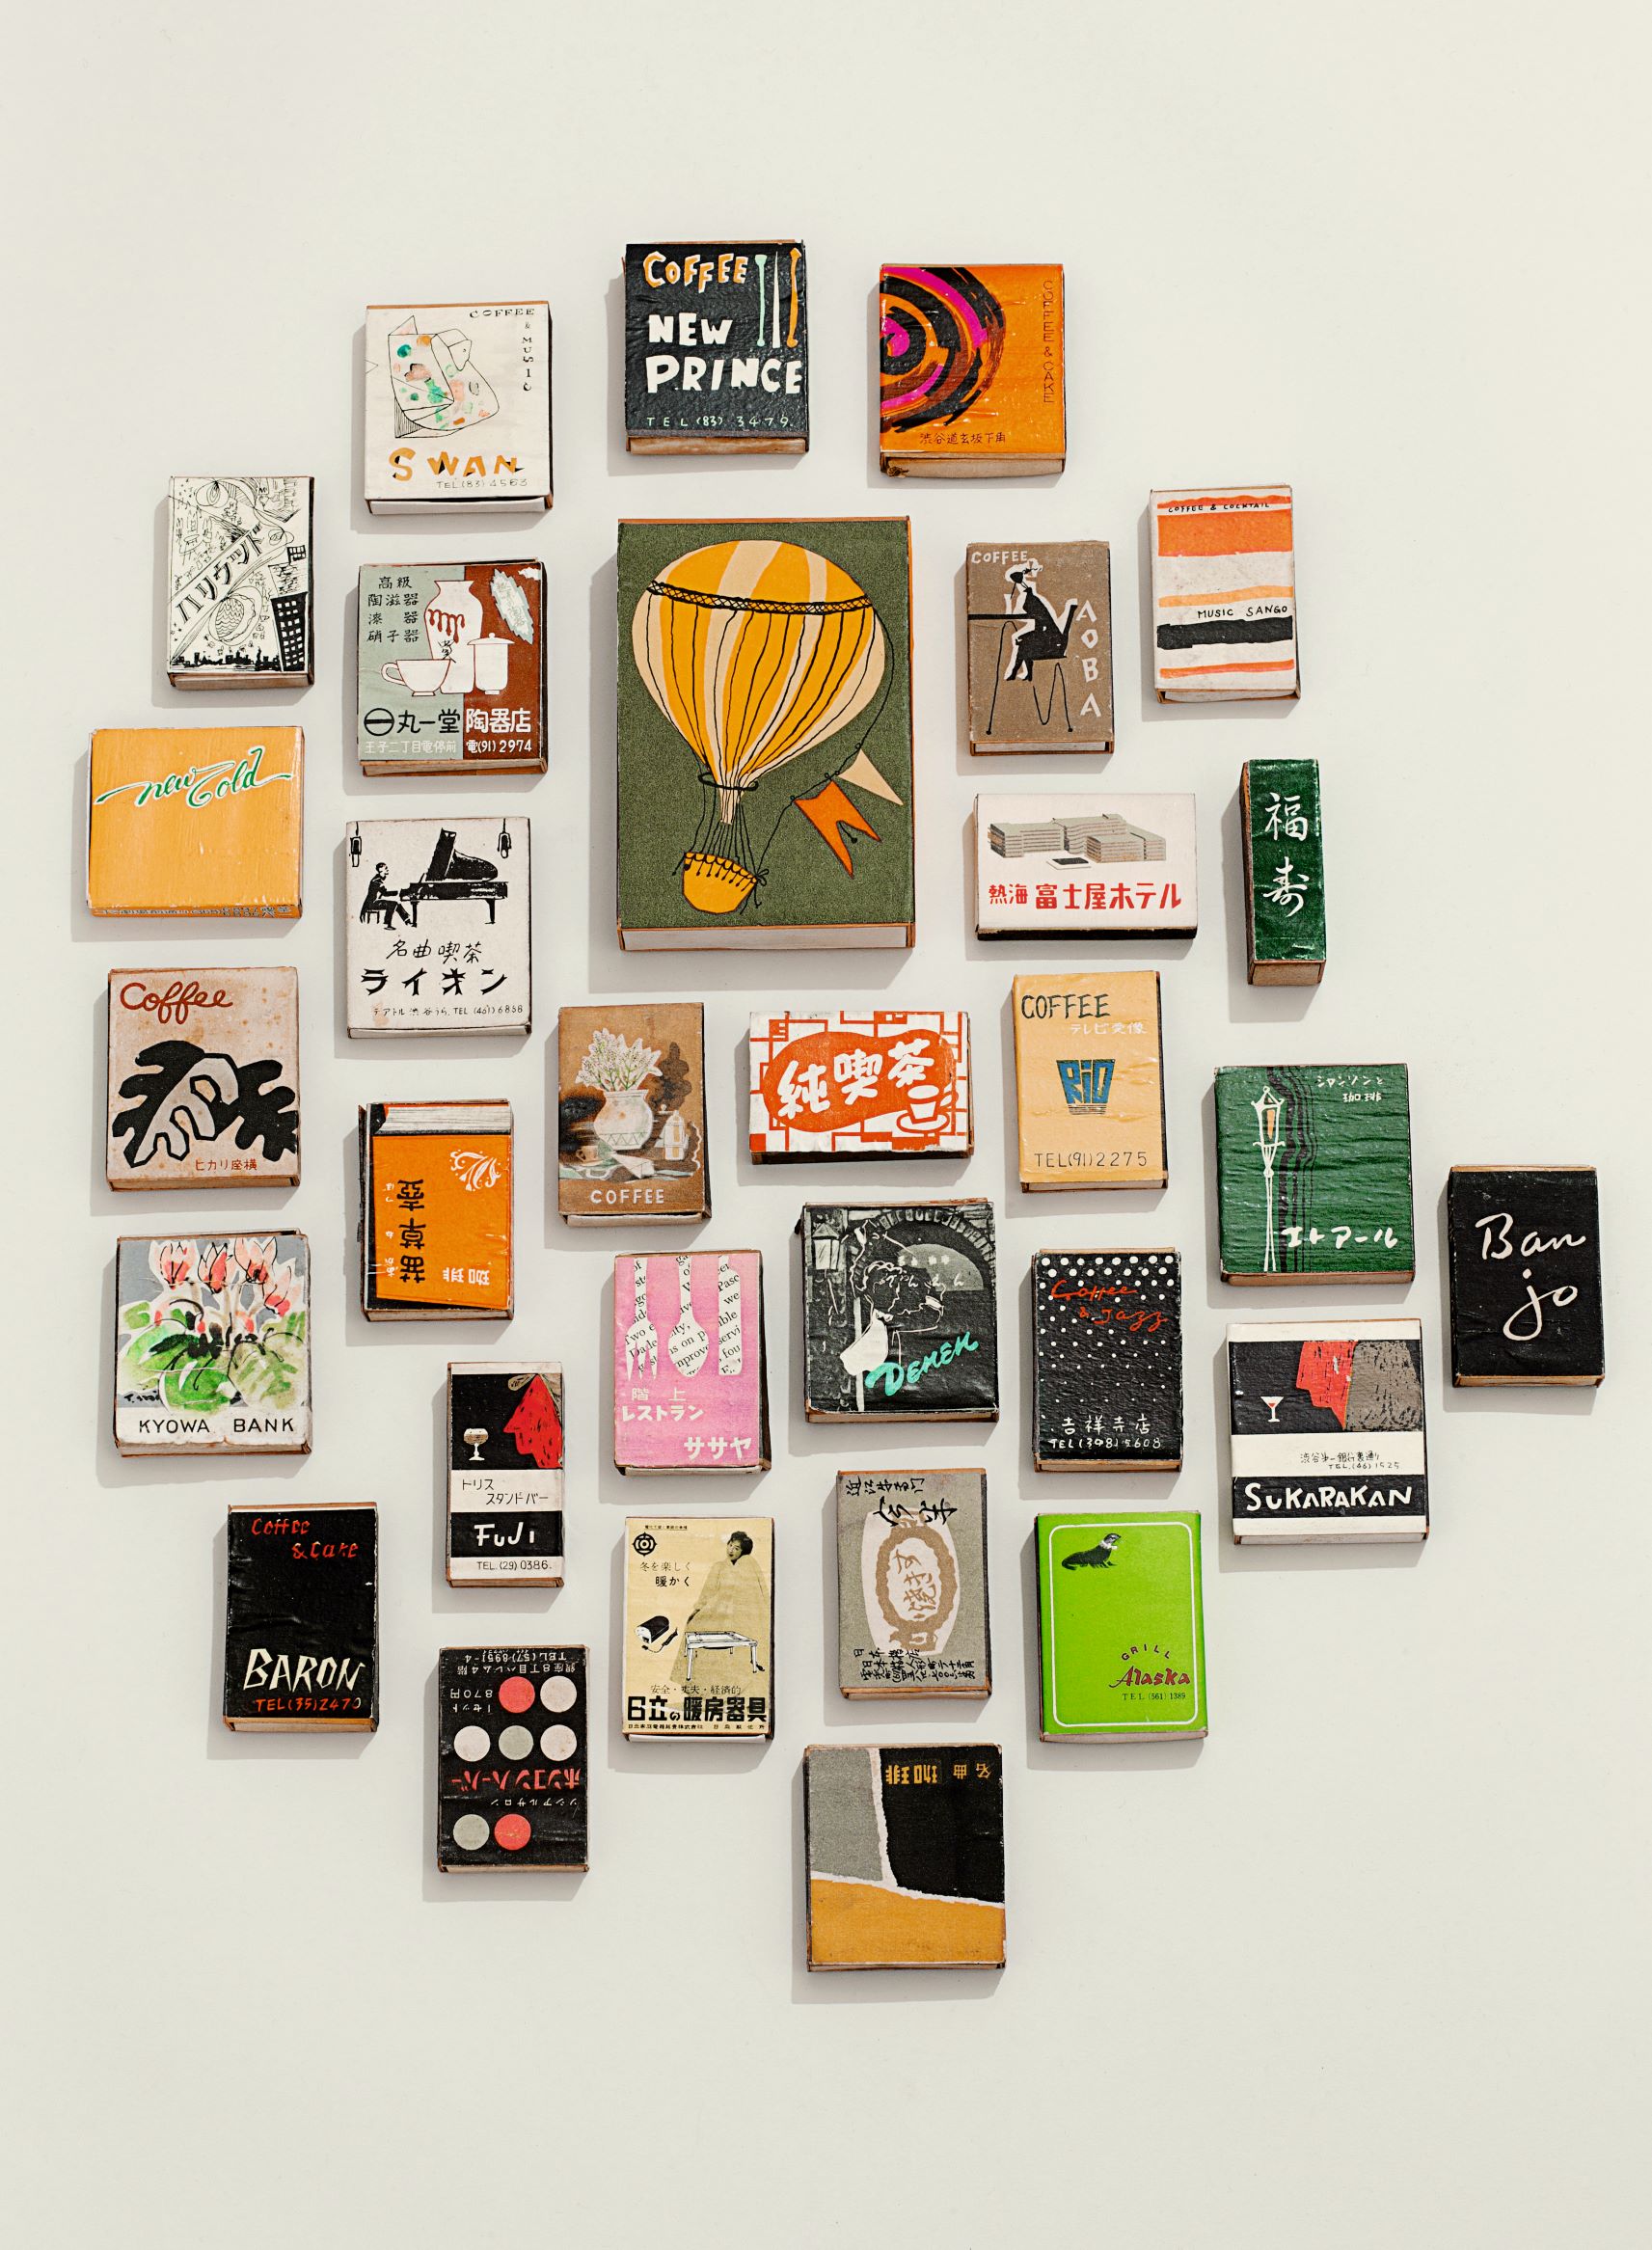 Matchbox Collection. Photo by Matthew Donaldson. From Paul Smith